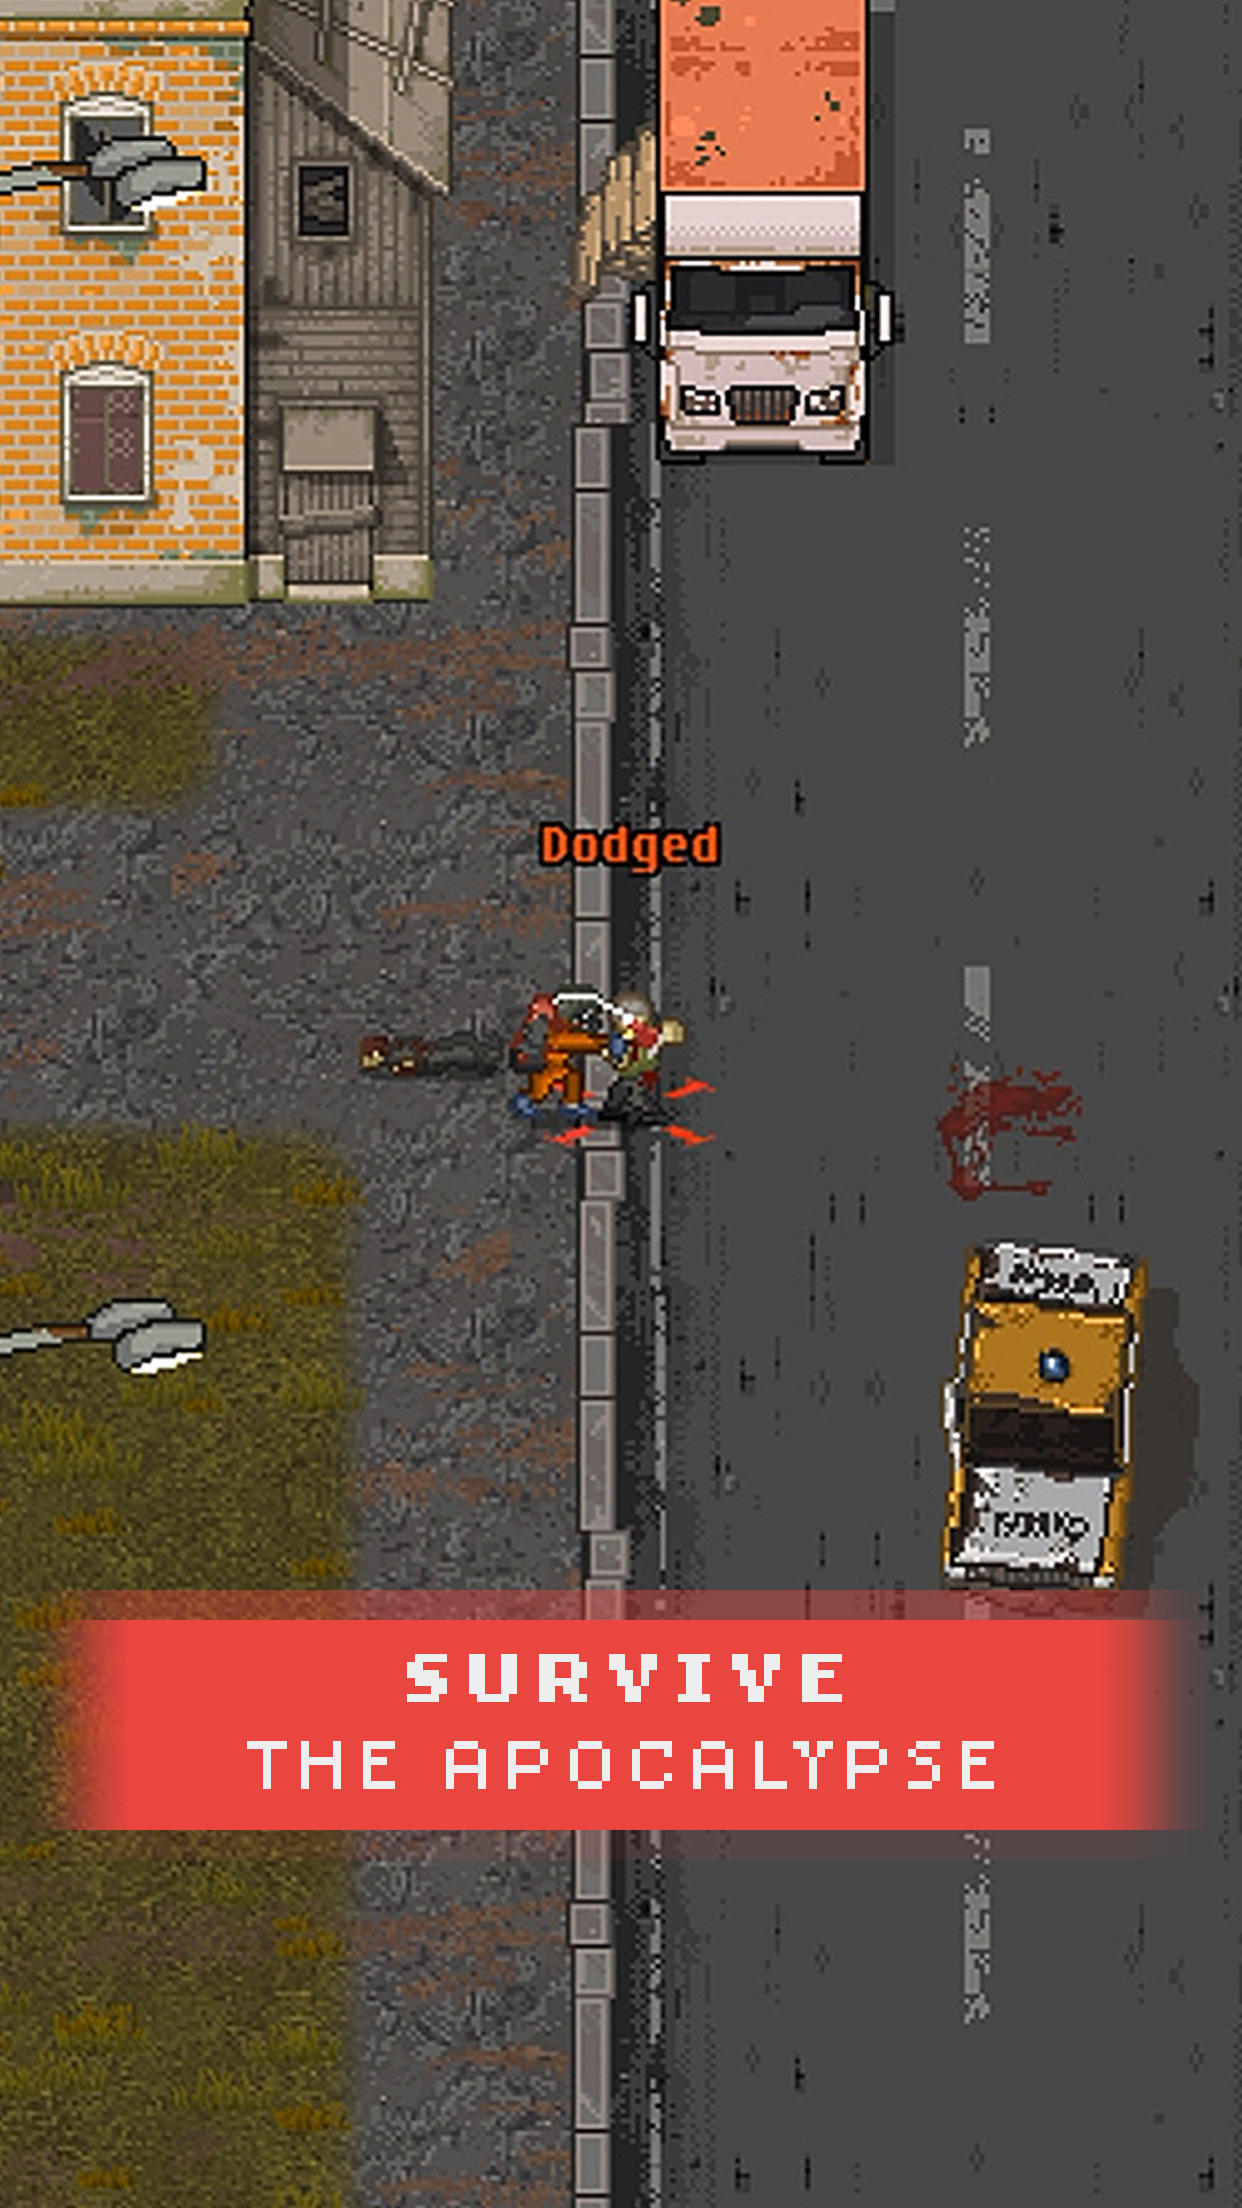 Open Beta for Survival Mobile Game Mini DayZ 2 Opens Today on